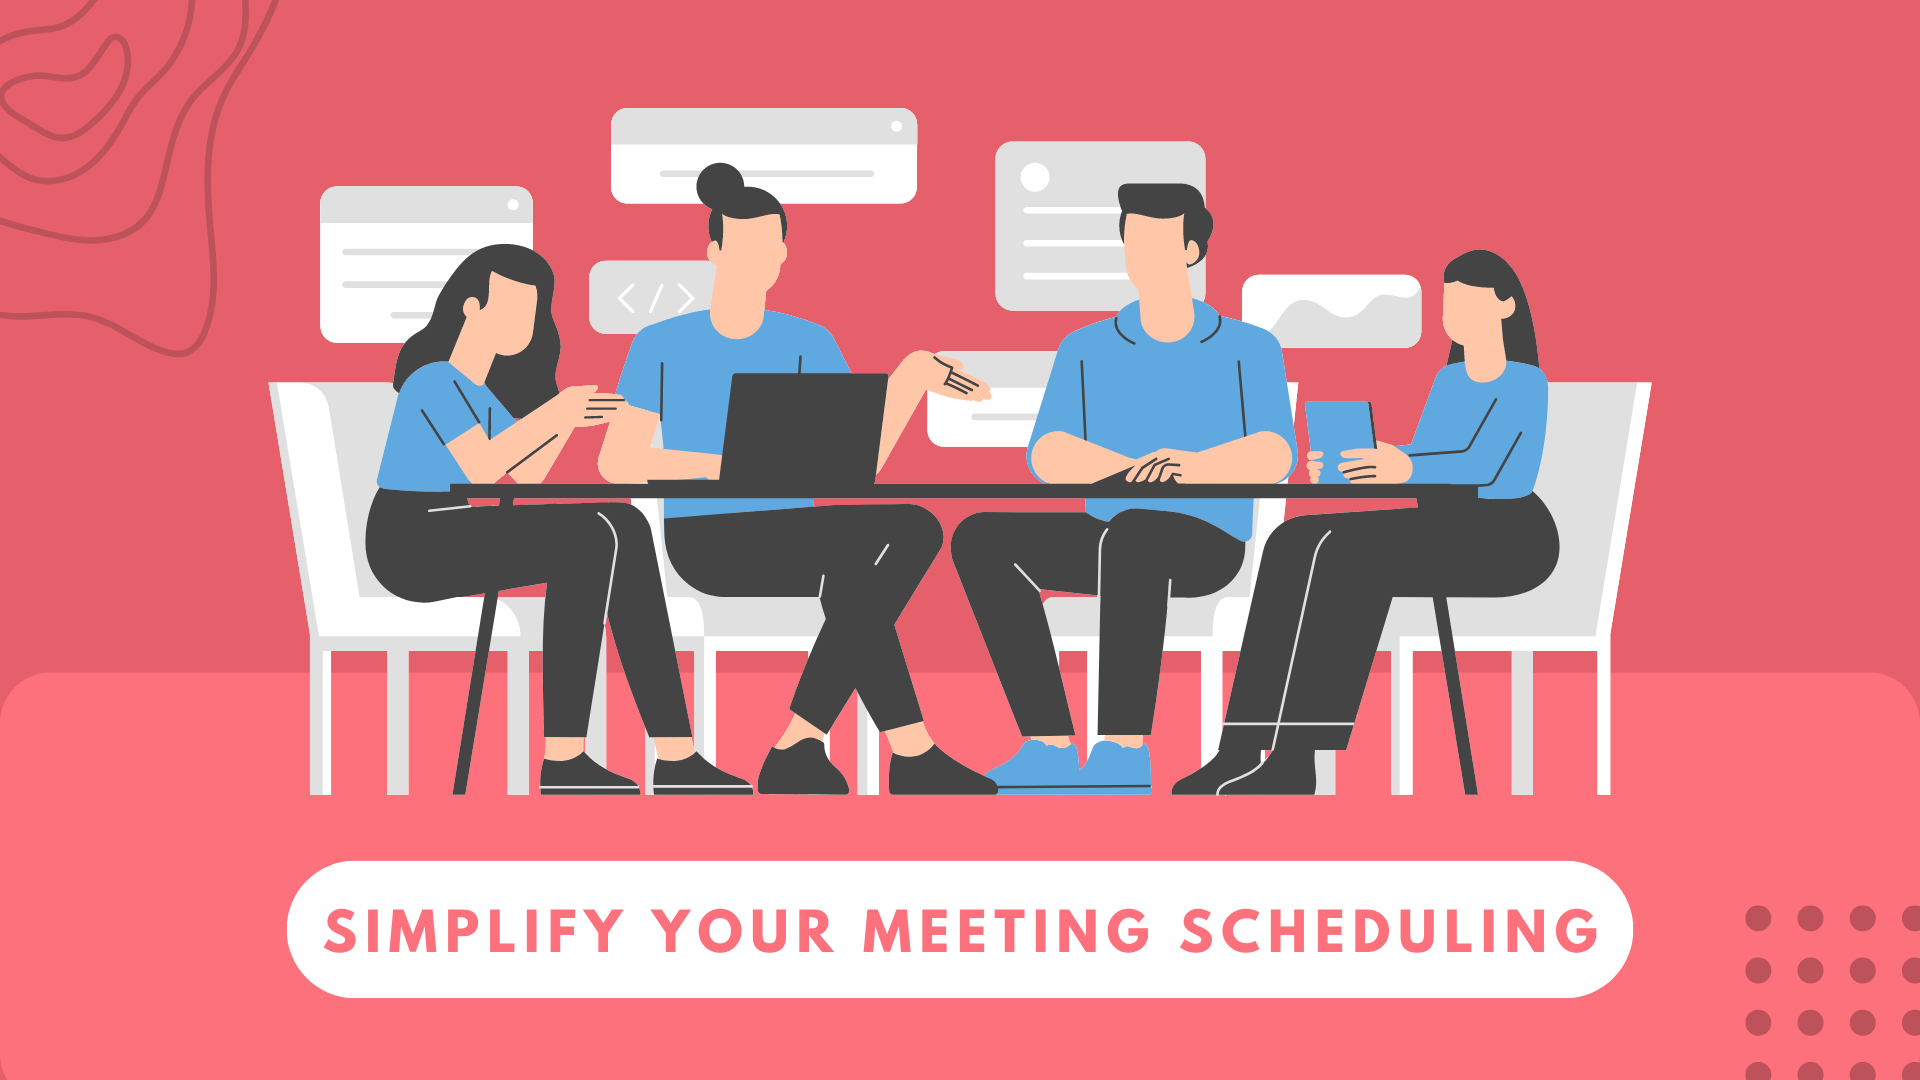 Simplify Your Meeting Scheduling